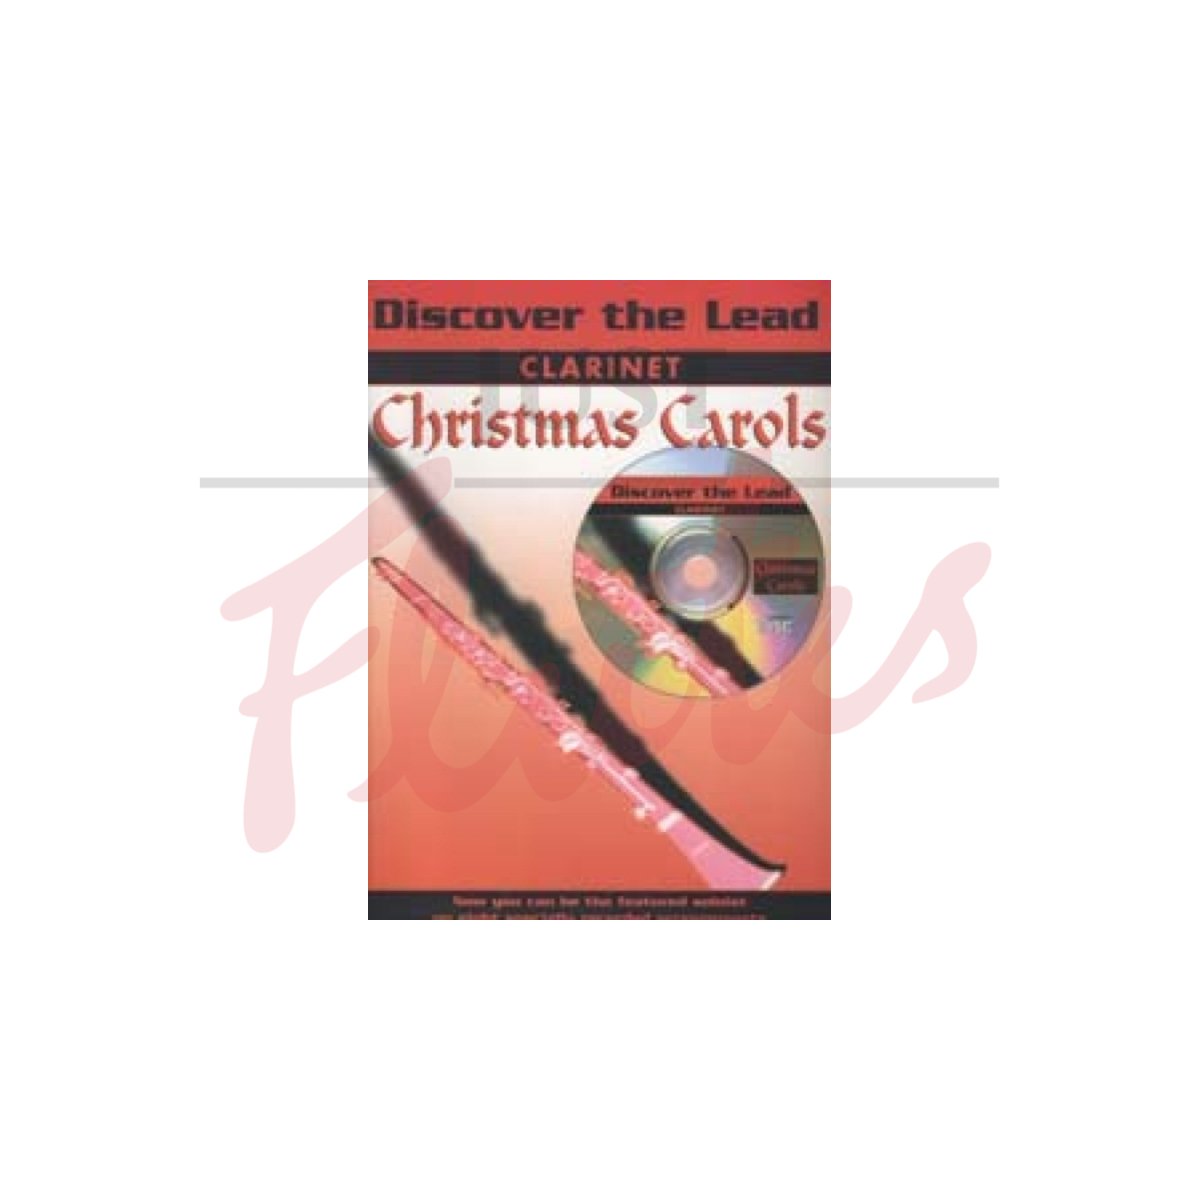 Discover The Lead: Christmas Carols [Clarinet]